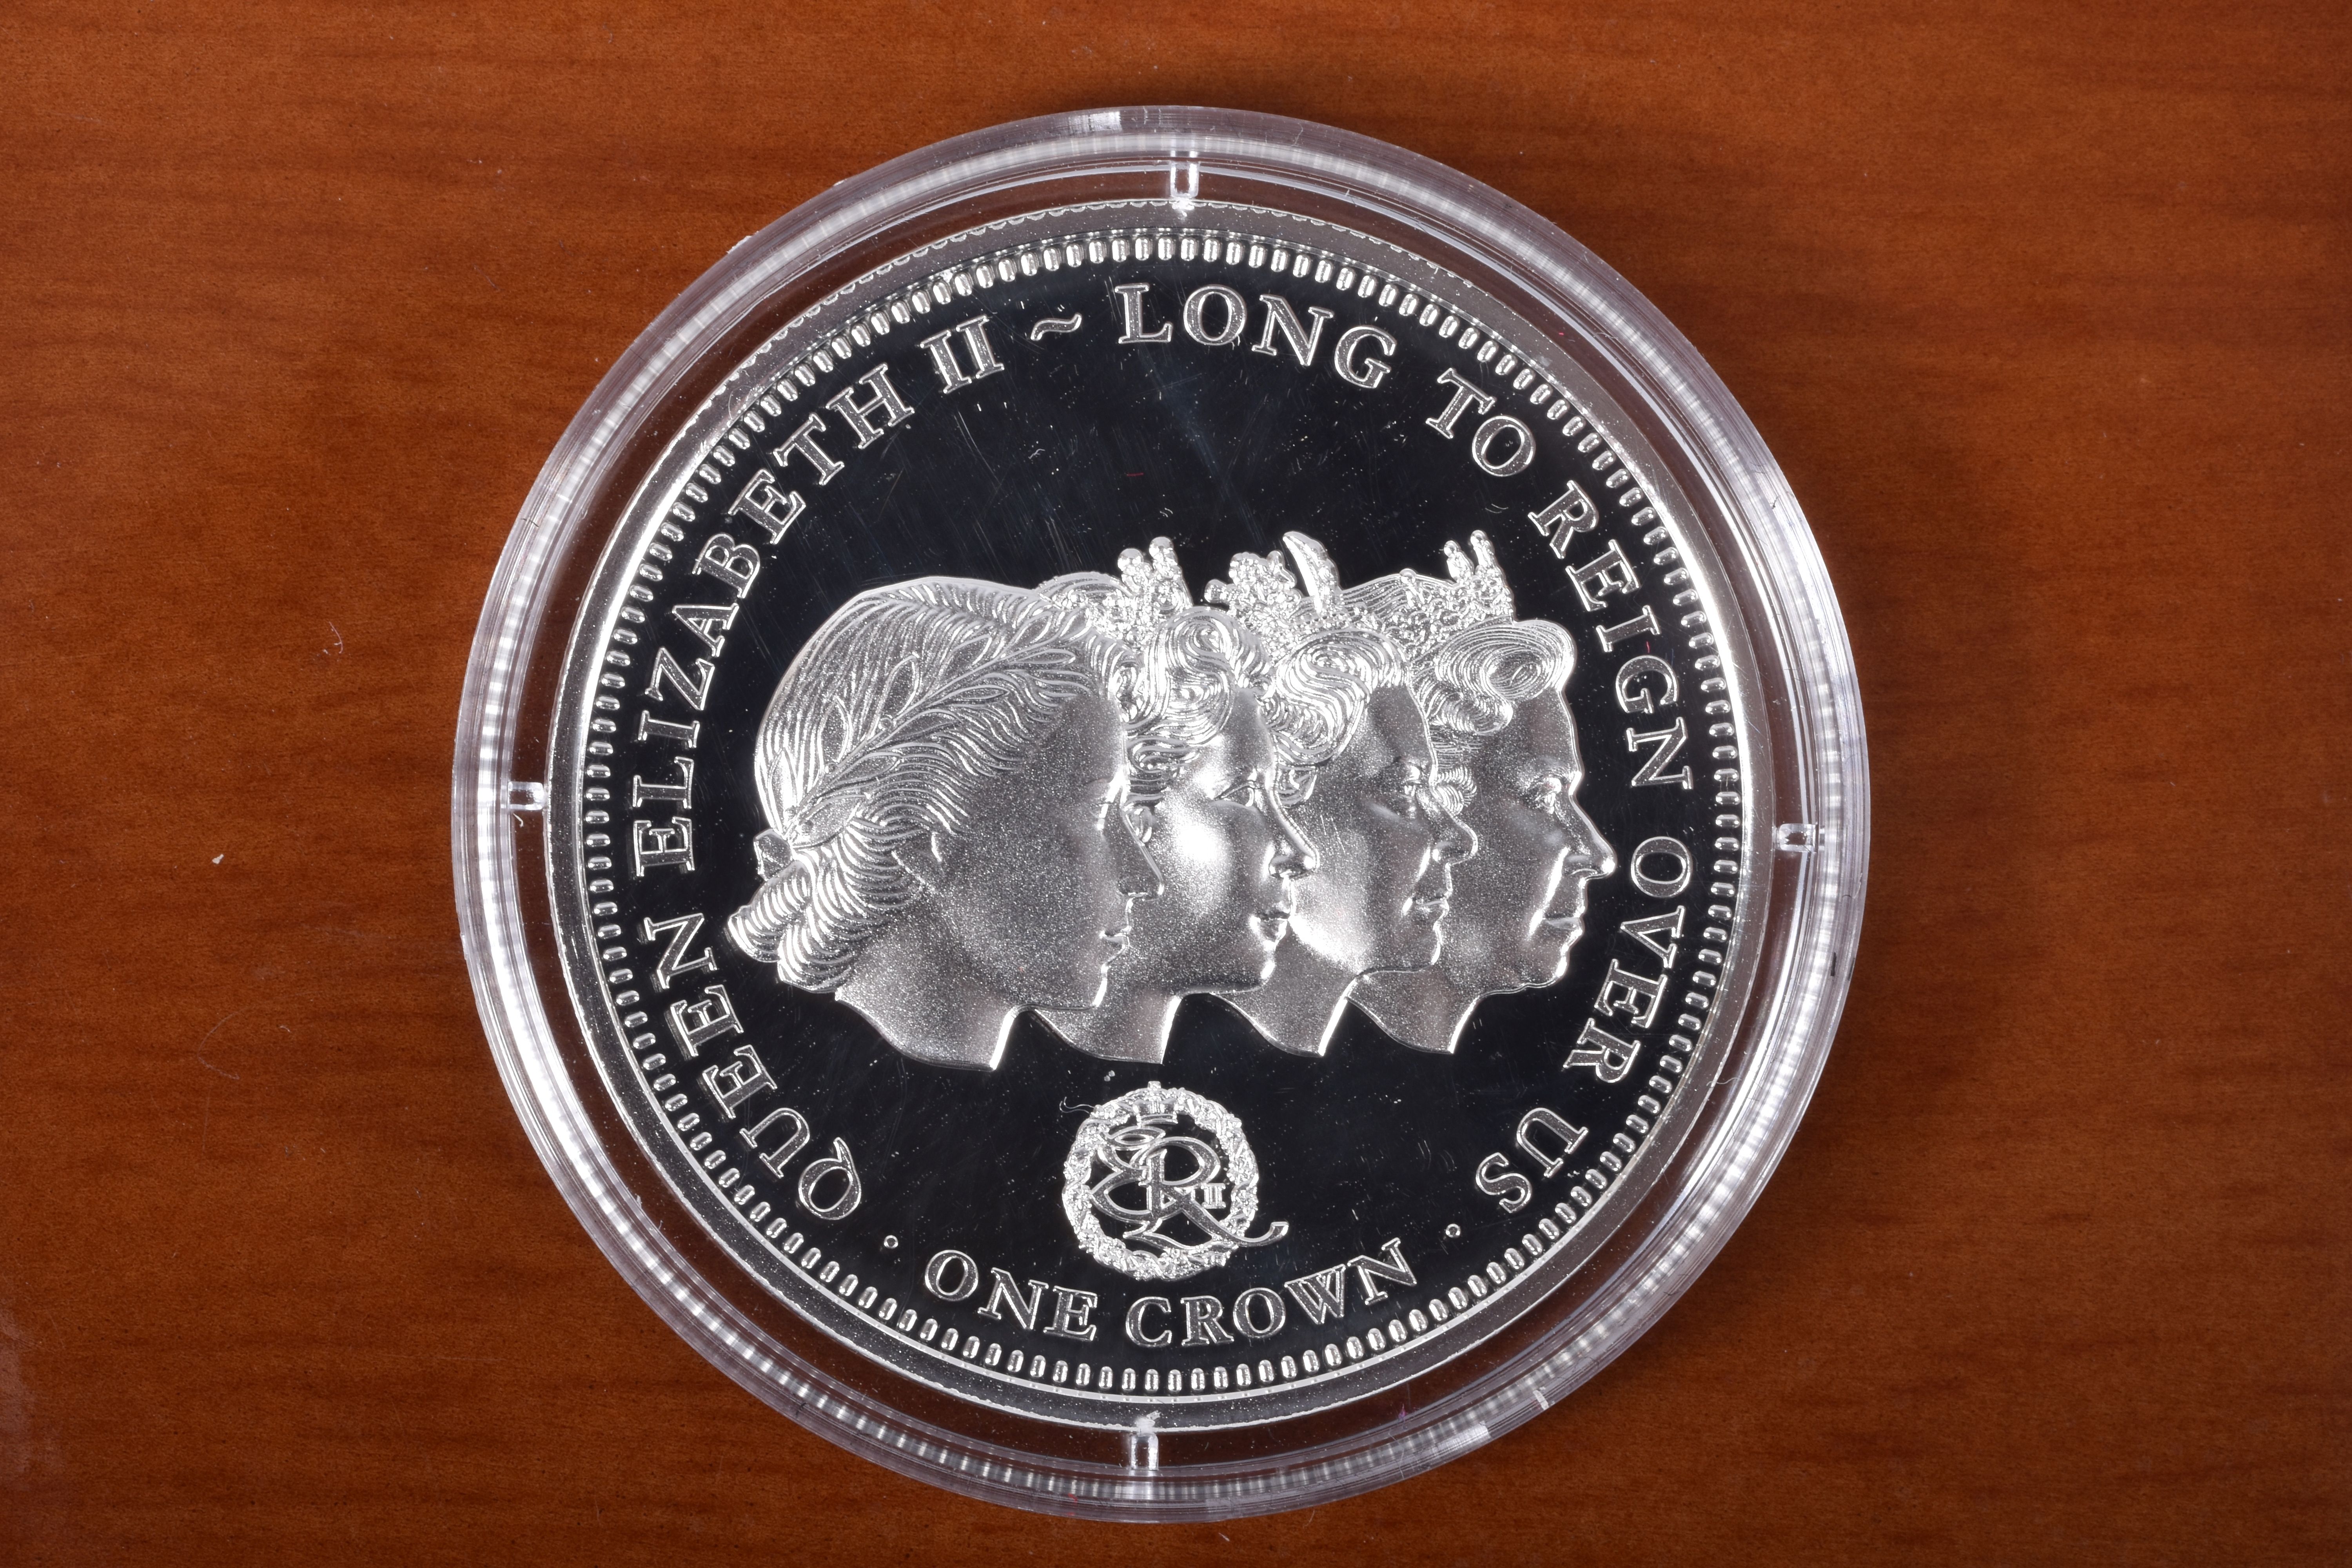 A 2012 SILVER PROOF .925 RENAMED THE ELIZABETH TOWER (Big Ben Clock Tower) 2oz Numisproof box and - Image 4 of 9